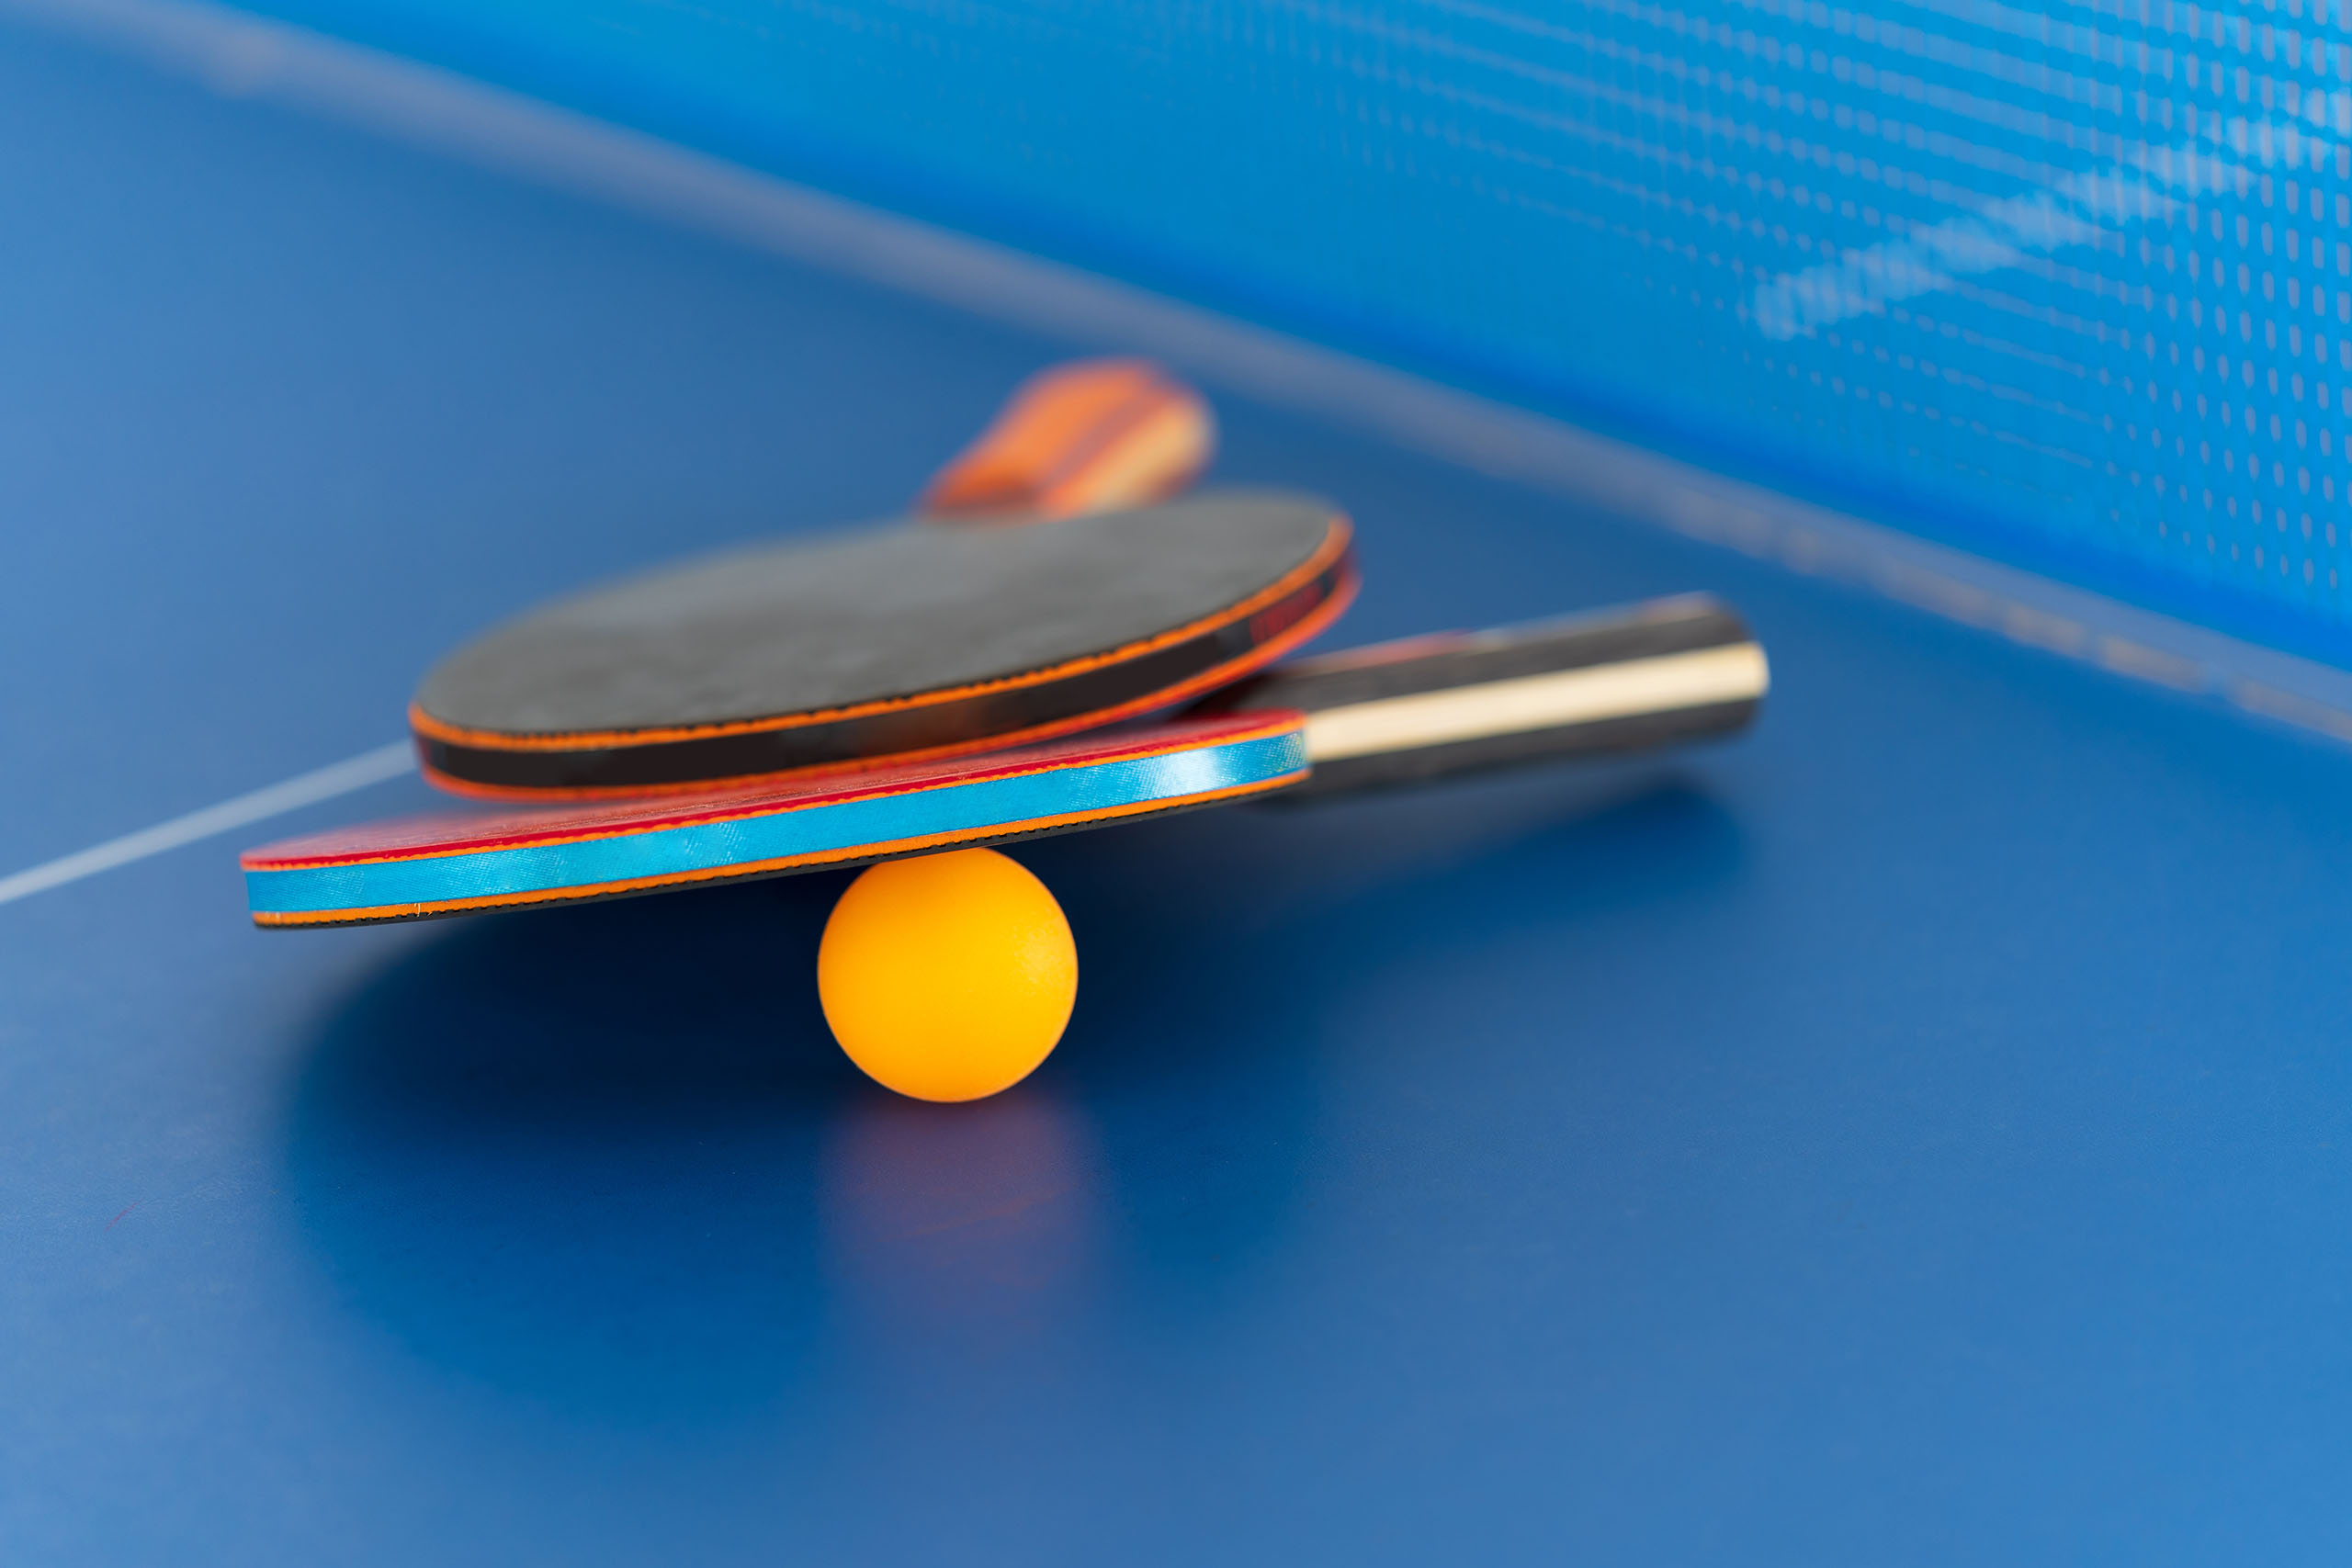 Table tennis racket and ball, Indoor sport activity